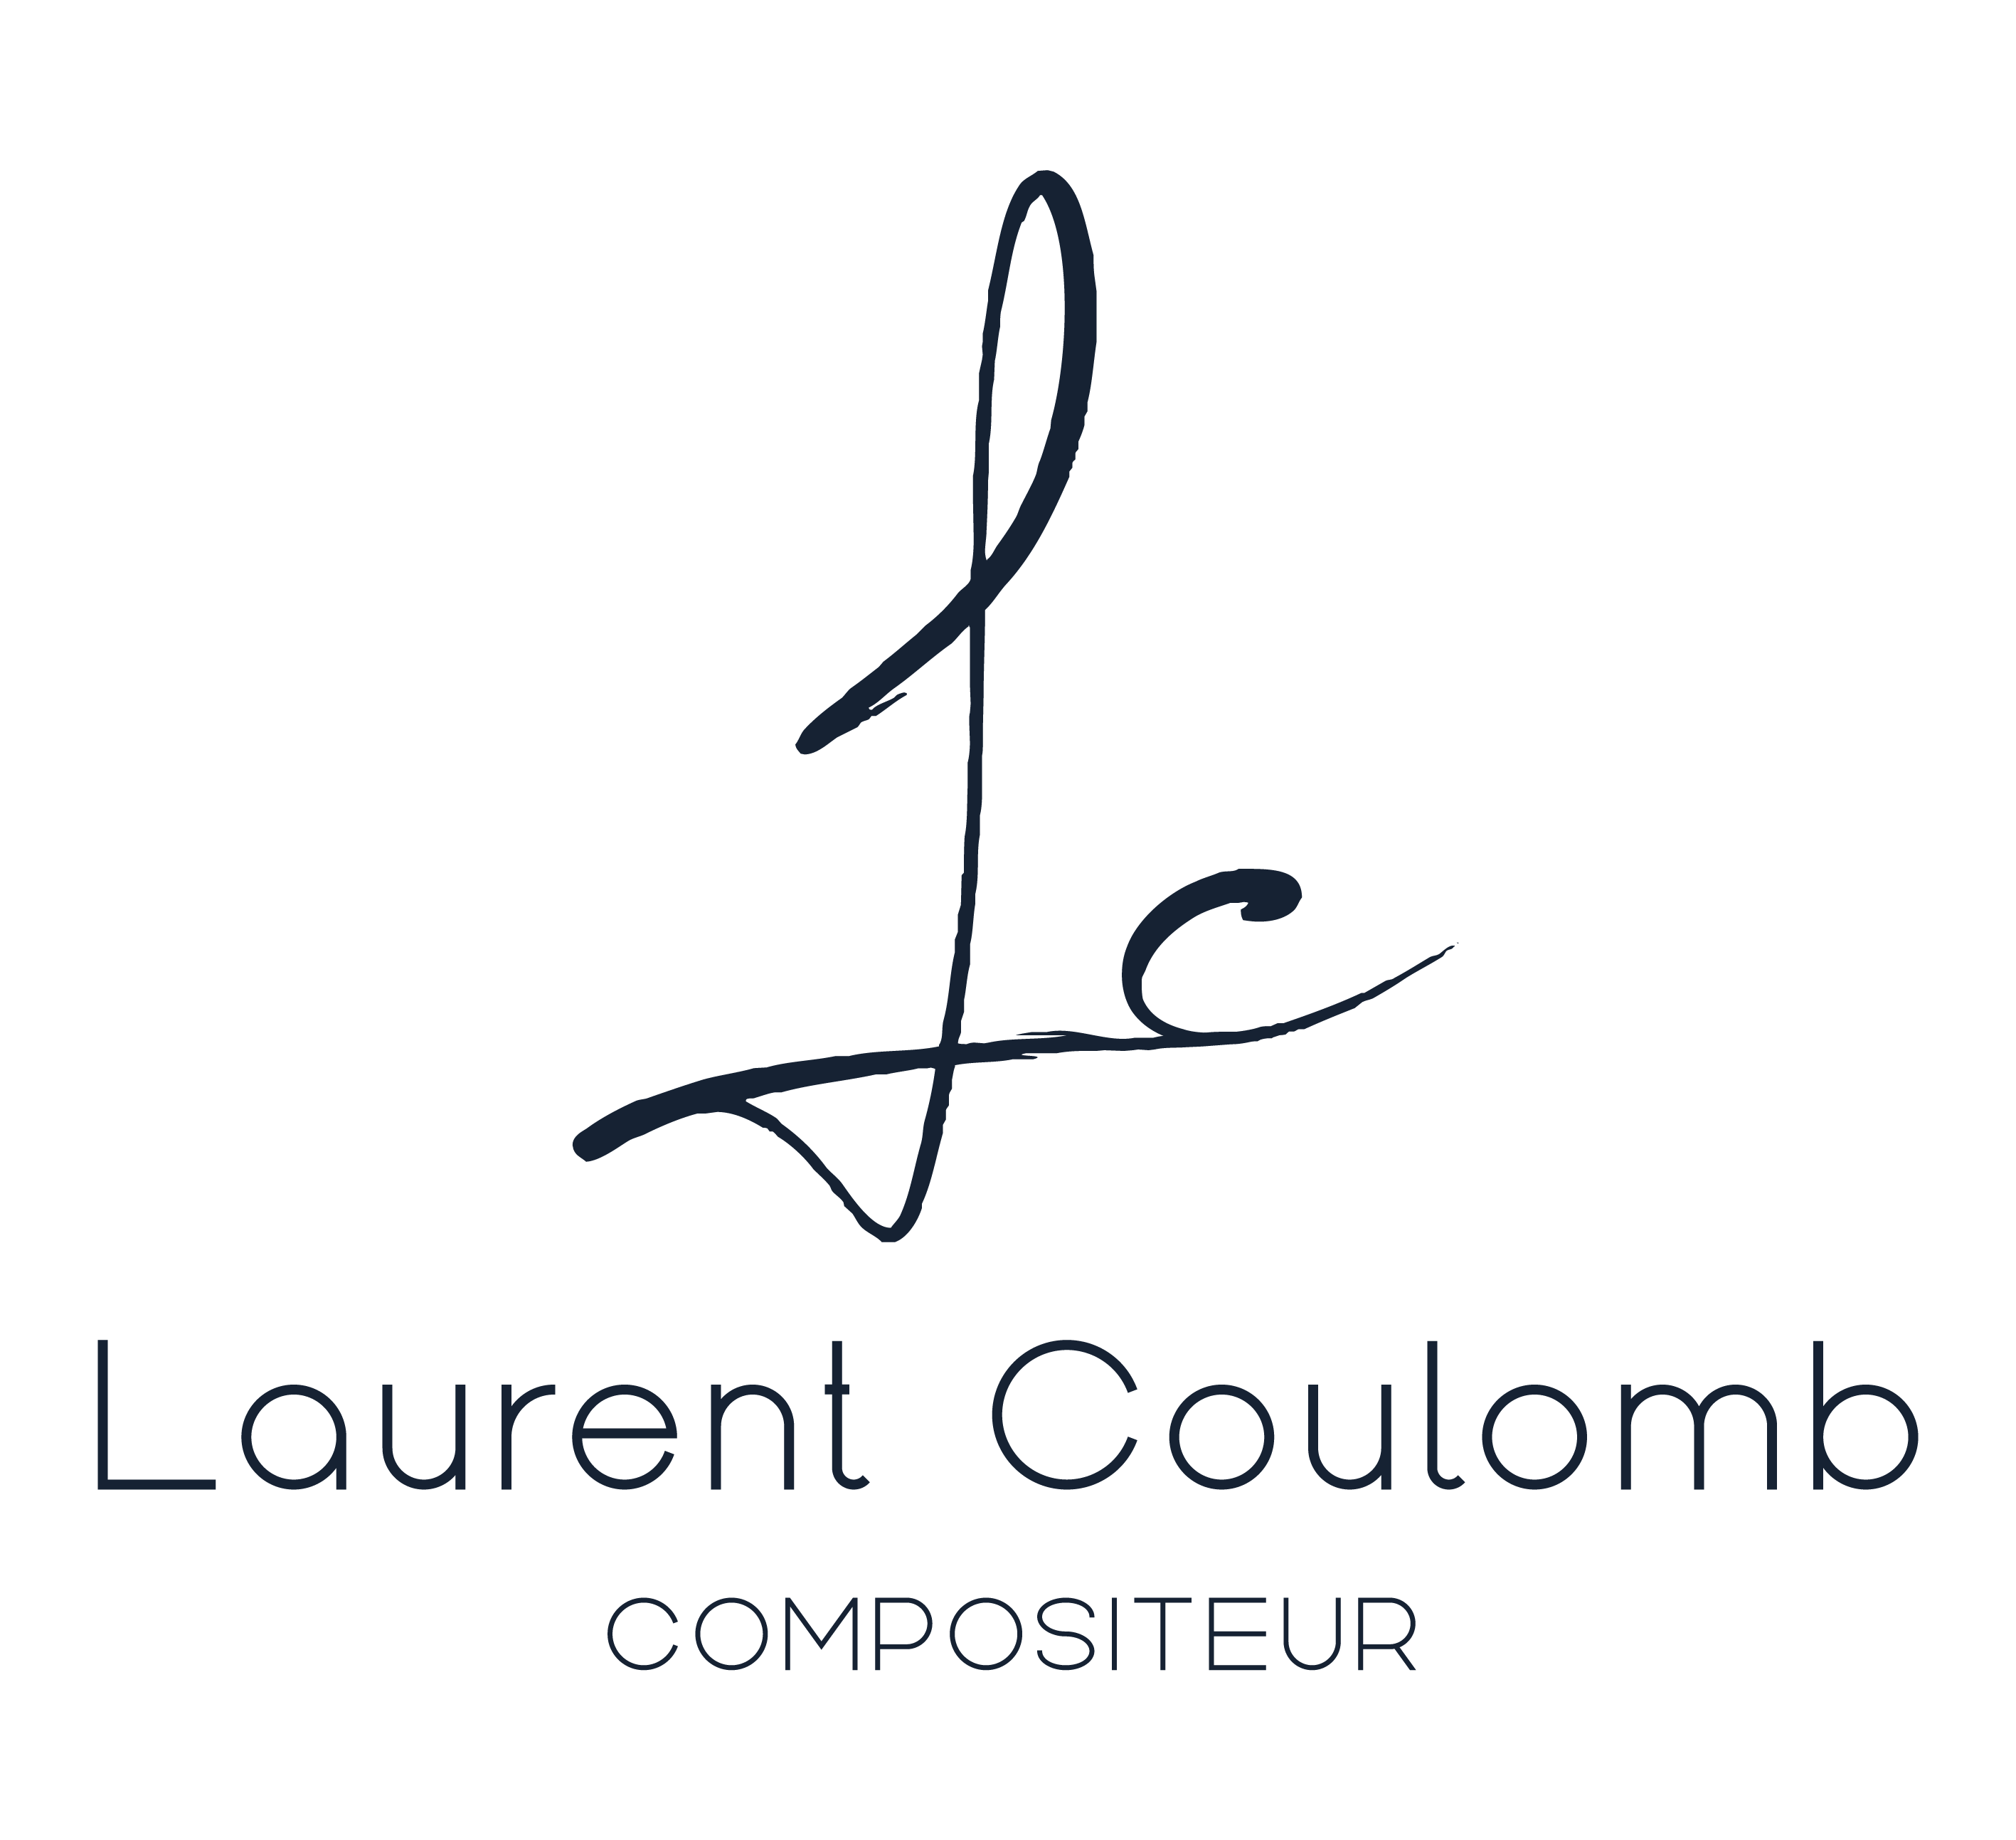 Laurent Coulomb